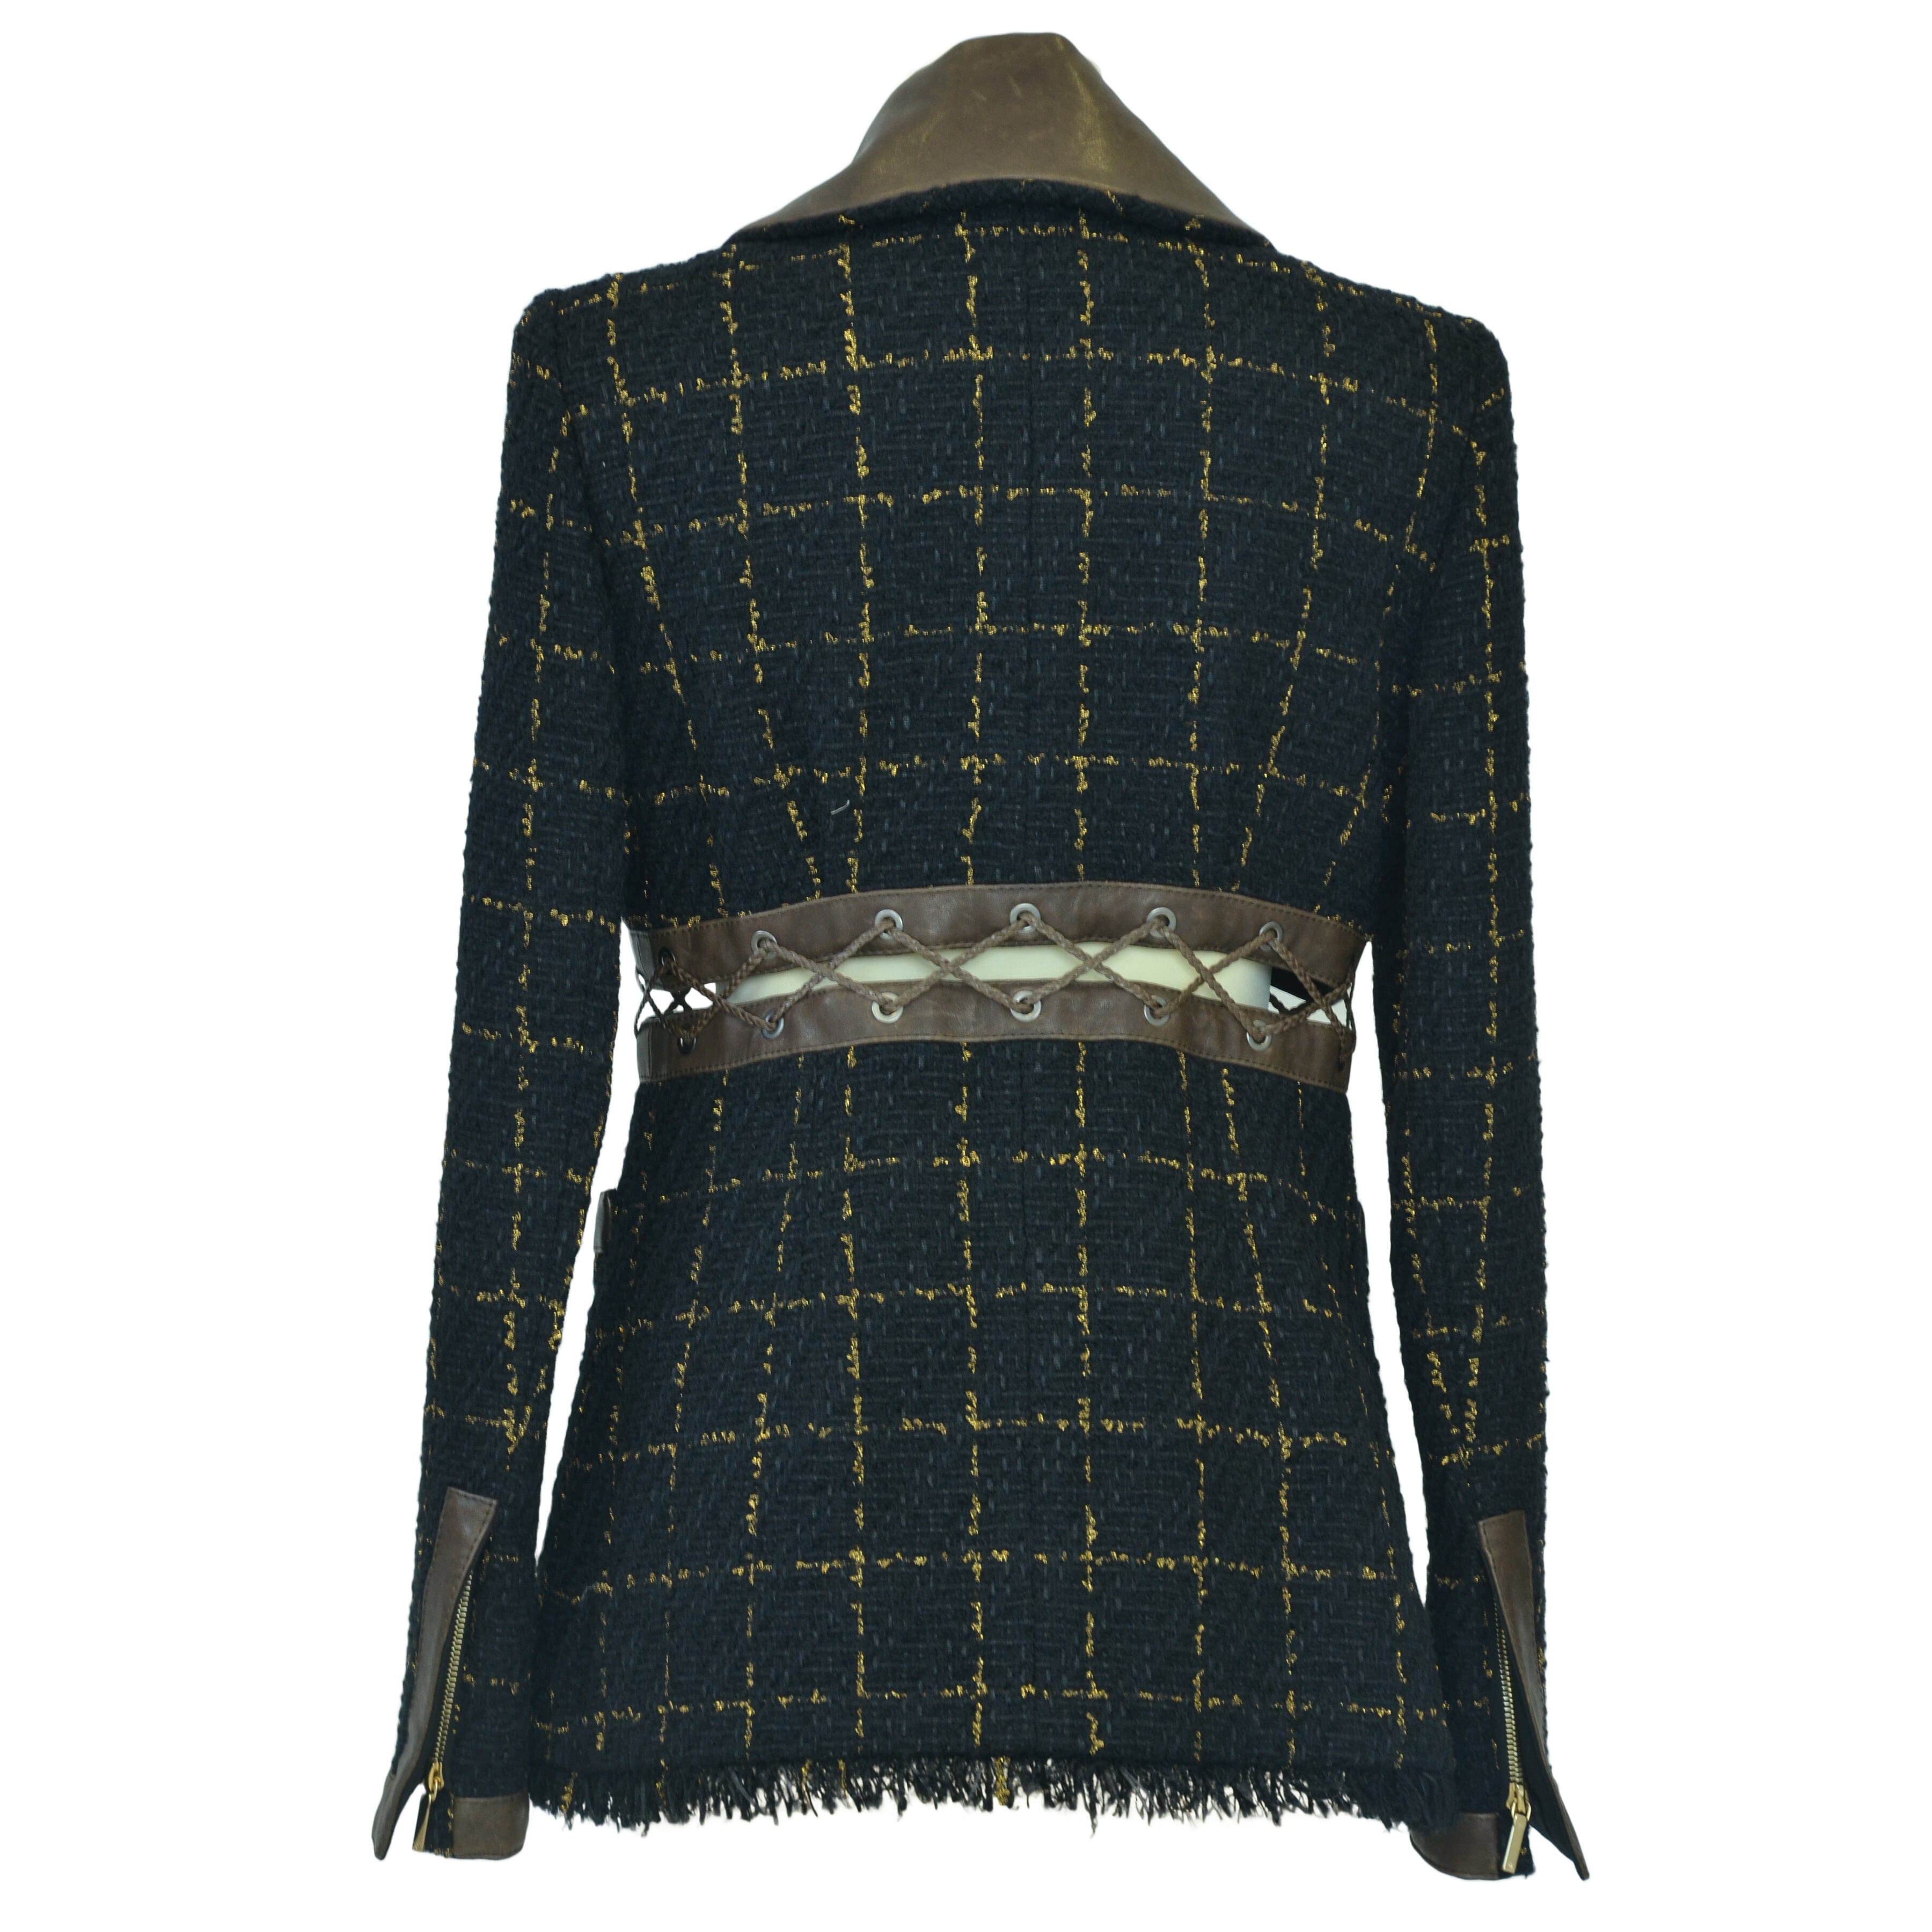 Black/Gold Fantasy Tweed Jacket with Leather Trims